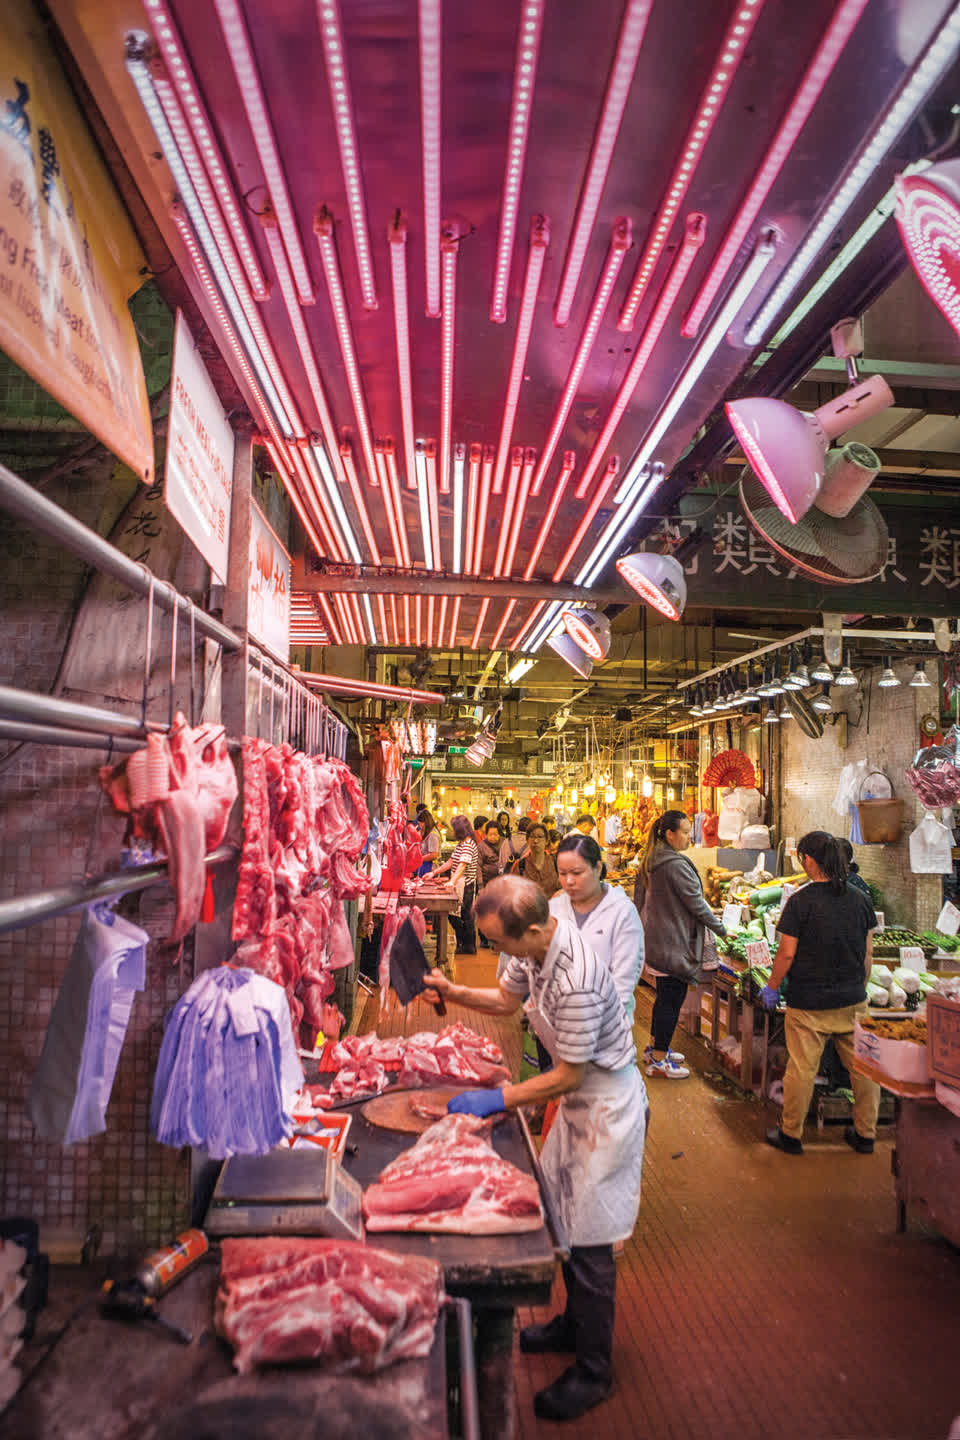 Hong Kong traditional wet market were run in the same way for decades.